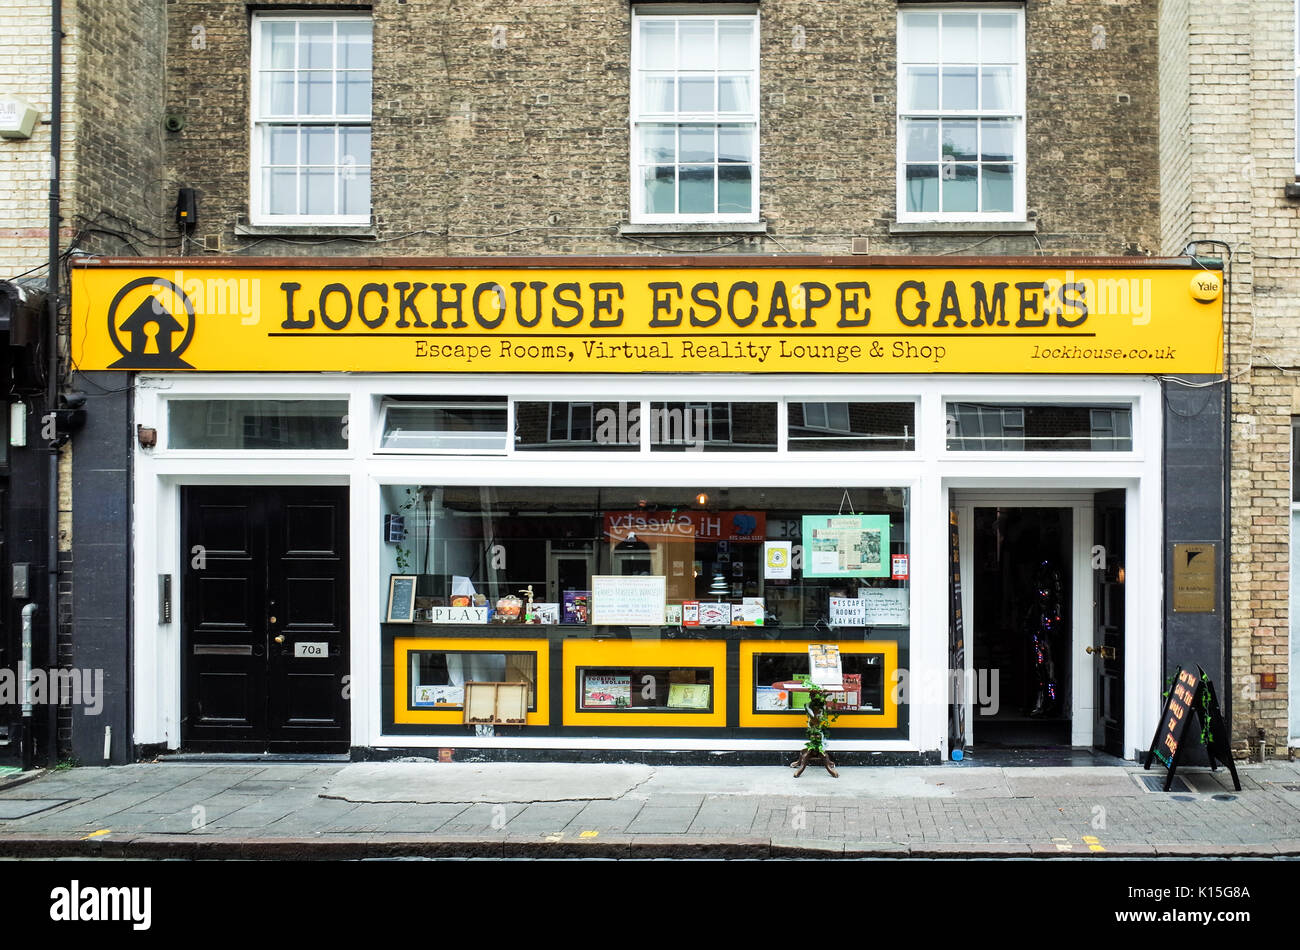 Lockhouse Escape Games in Cambridge, specialises in escape games, Virtual Reality experiences, board games and puzzles. Stock Photo